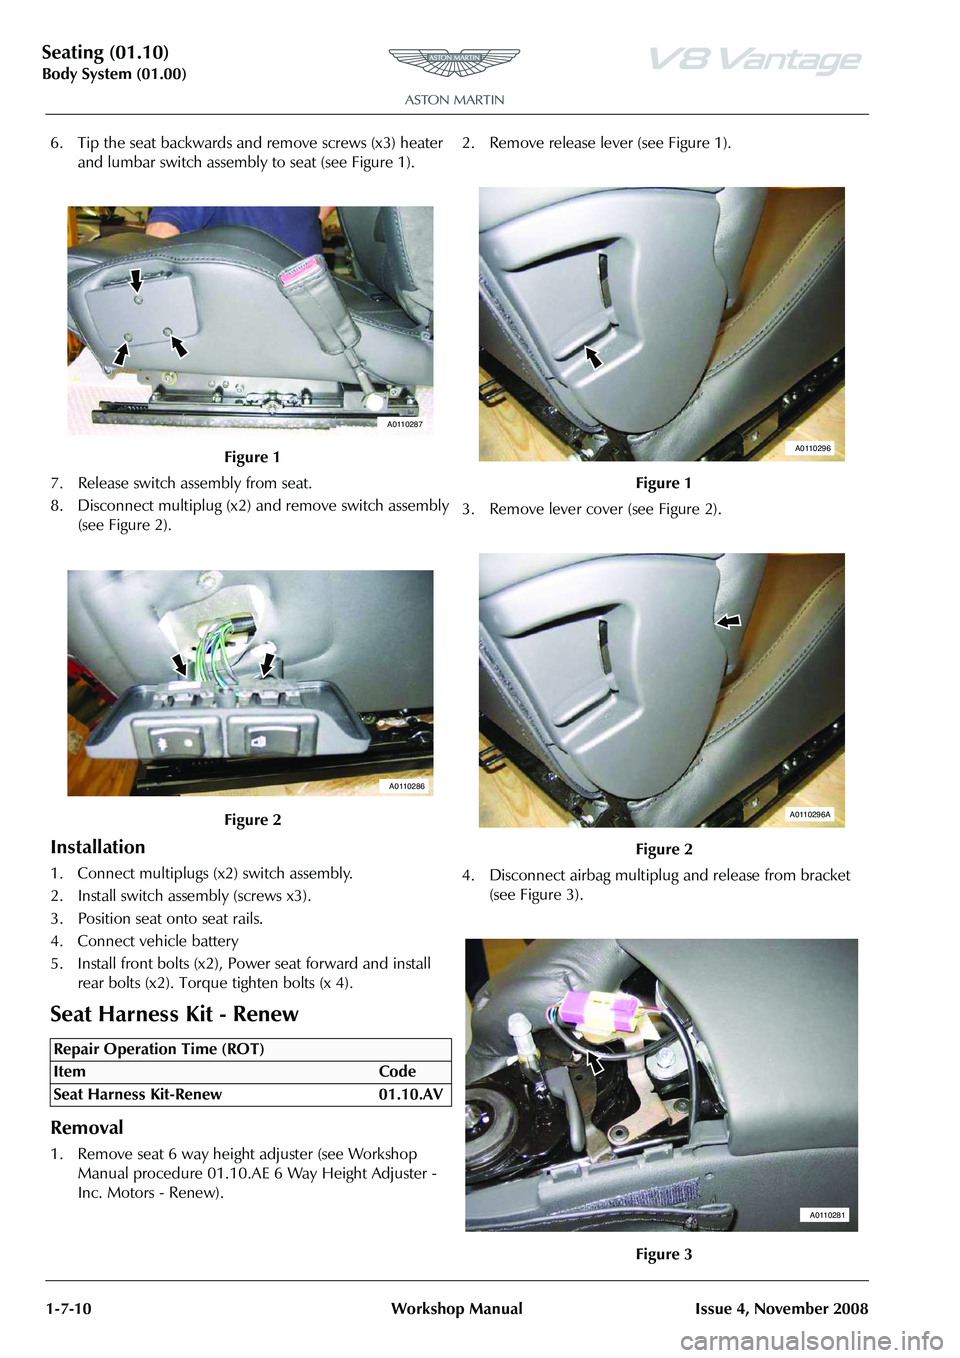 ASTON MARTIN V8 VANTAGE 2010  Workshop Manual Seating (01.10)
Body System (01.00)1-7-10 Workshop Manual Issue 4, November 2008
6. Tip the seat backwards and remove screws (x3) heater  and lumbar switch assembly to seat (see Figure 1).
7. Release 